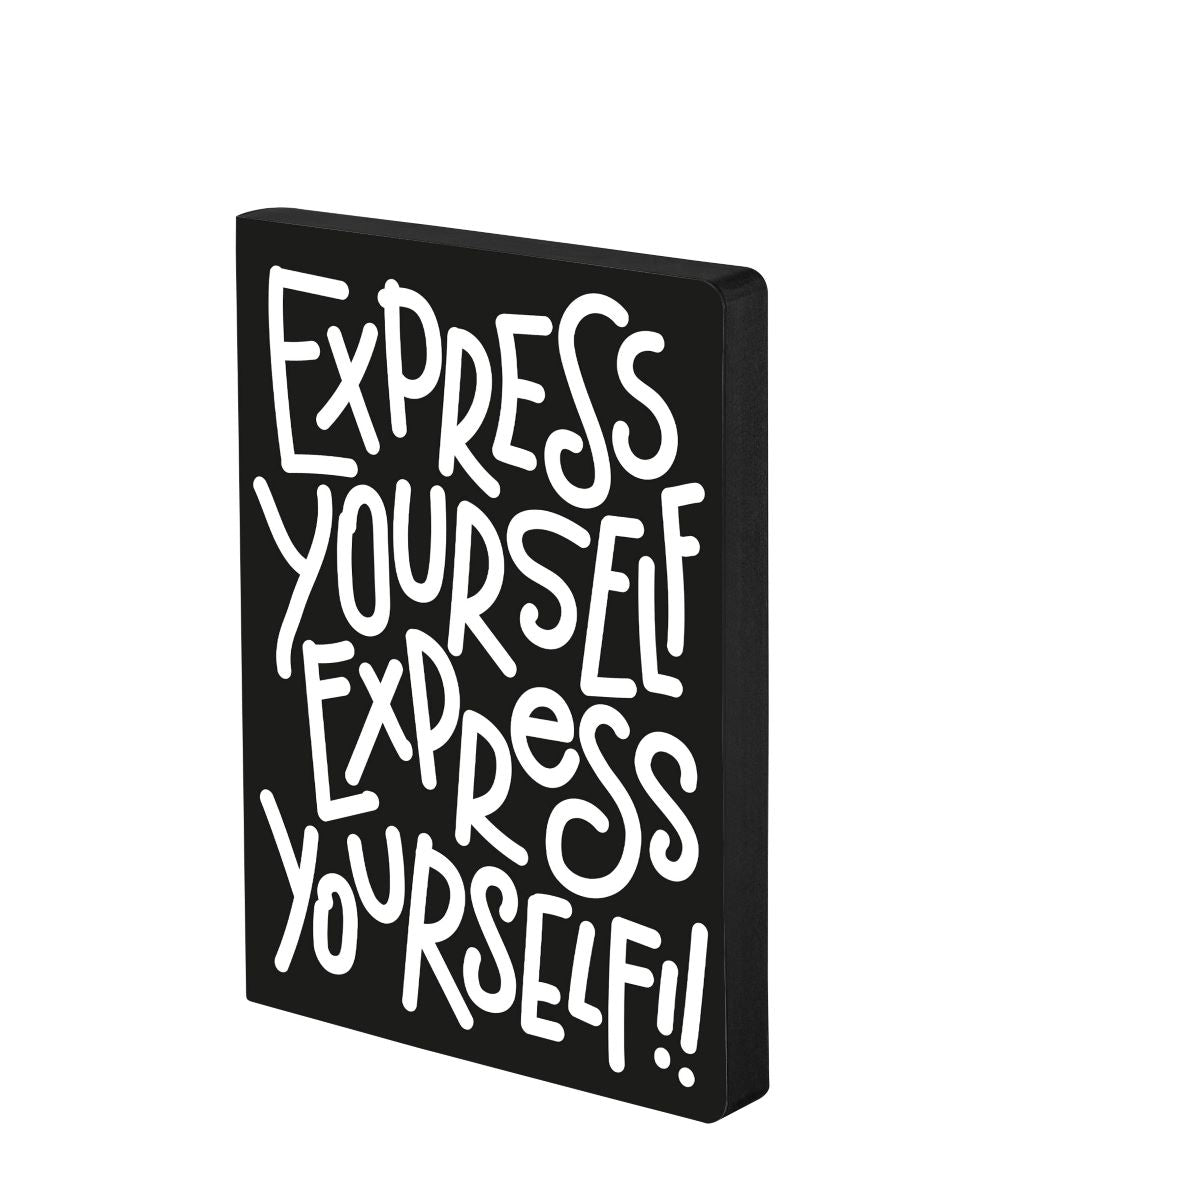 Nuuna Graphic L - Express yourself